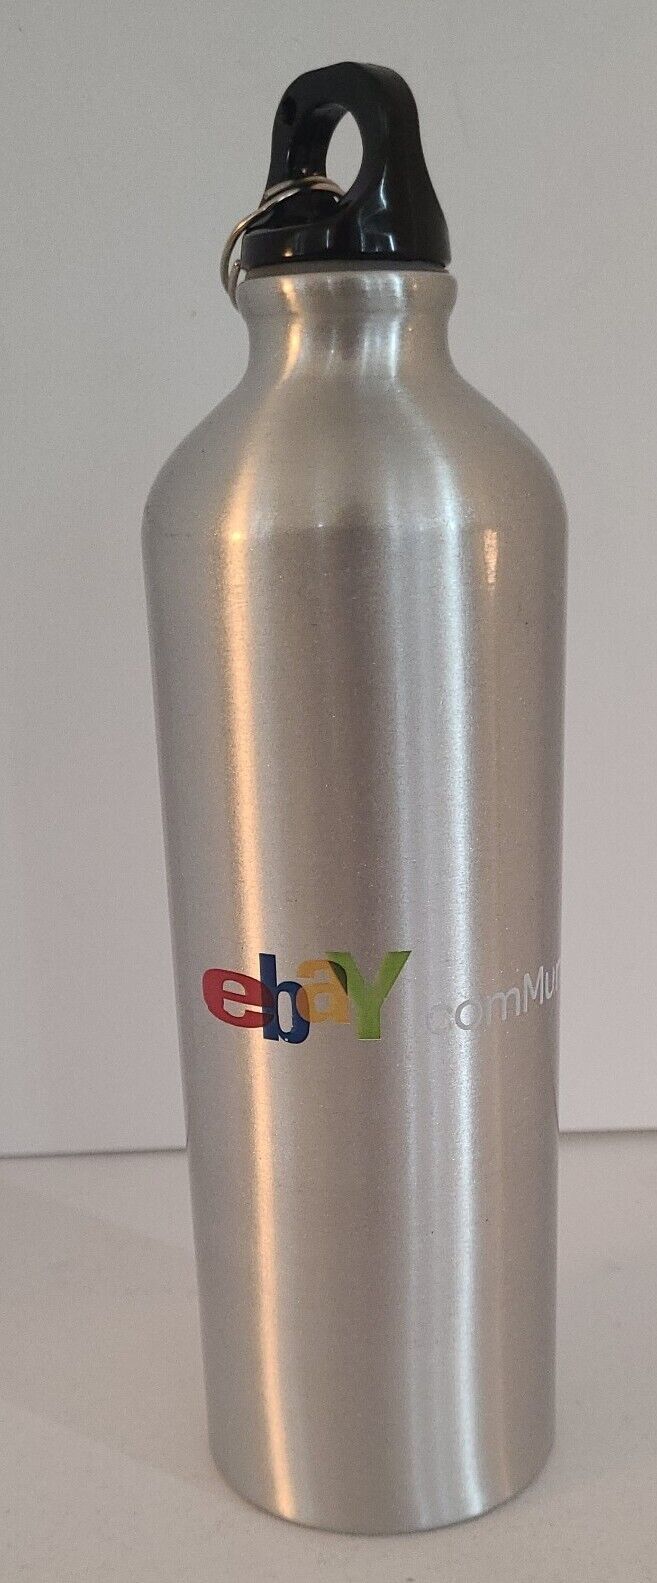 Primary image for eBay Community Silver Metal Water Bottle